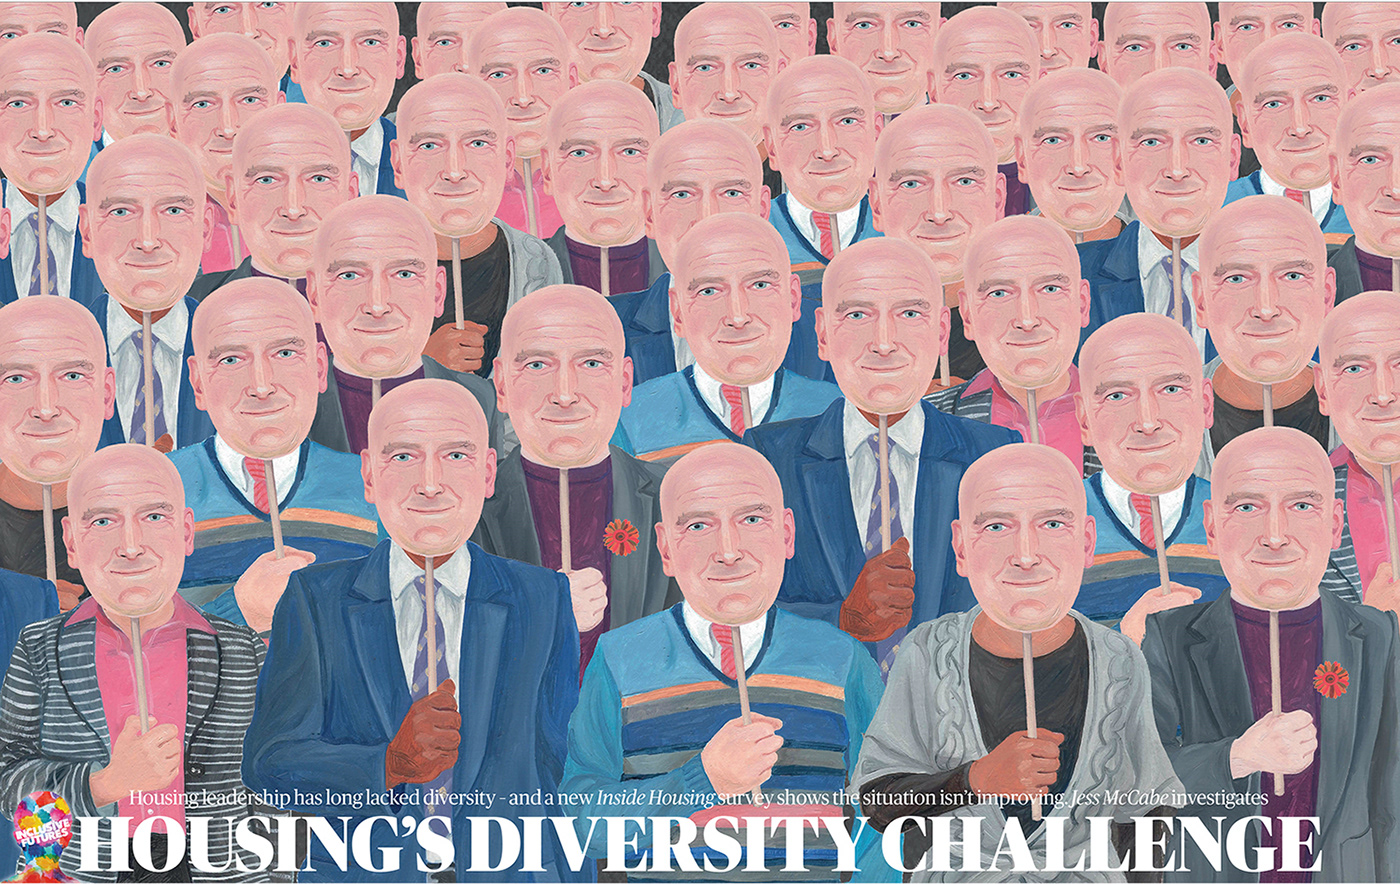 being john malkovich characters Diversity editorial faces Leadership magazine Oils people